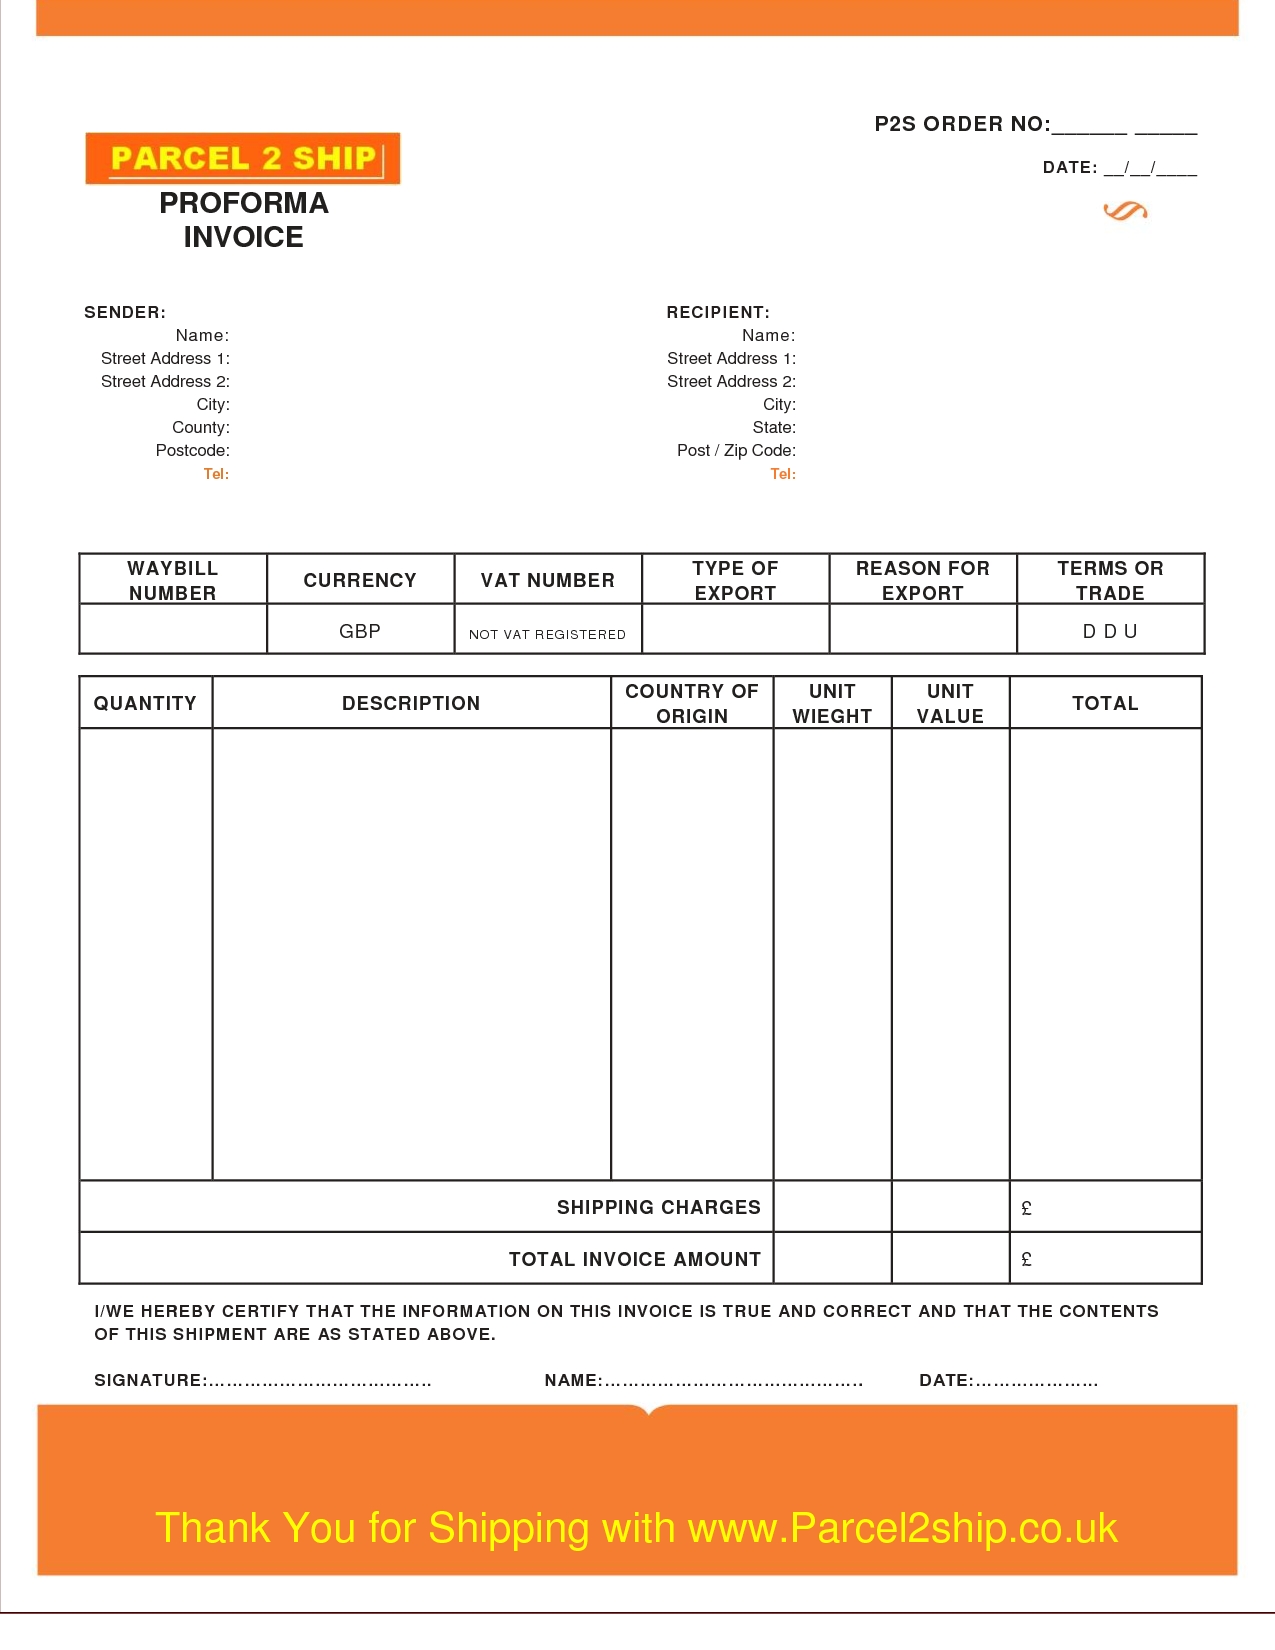 pro forma invoice free business template pro forma invoice example